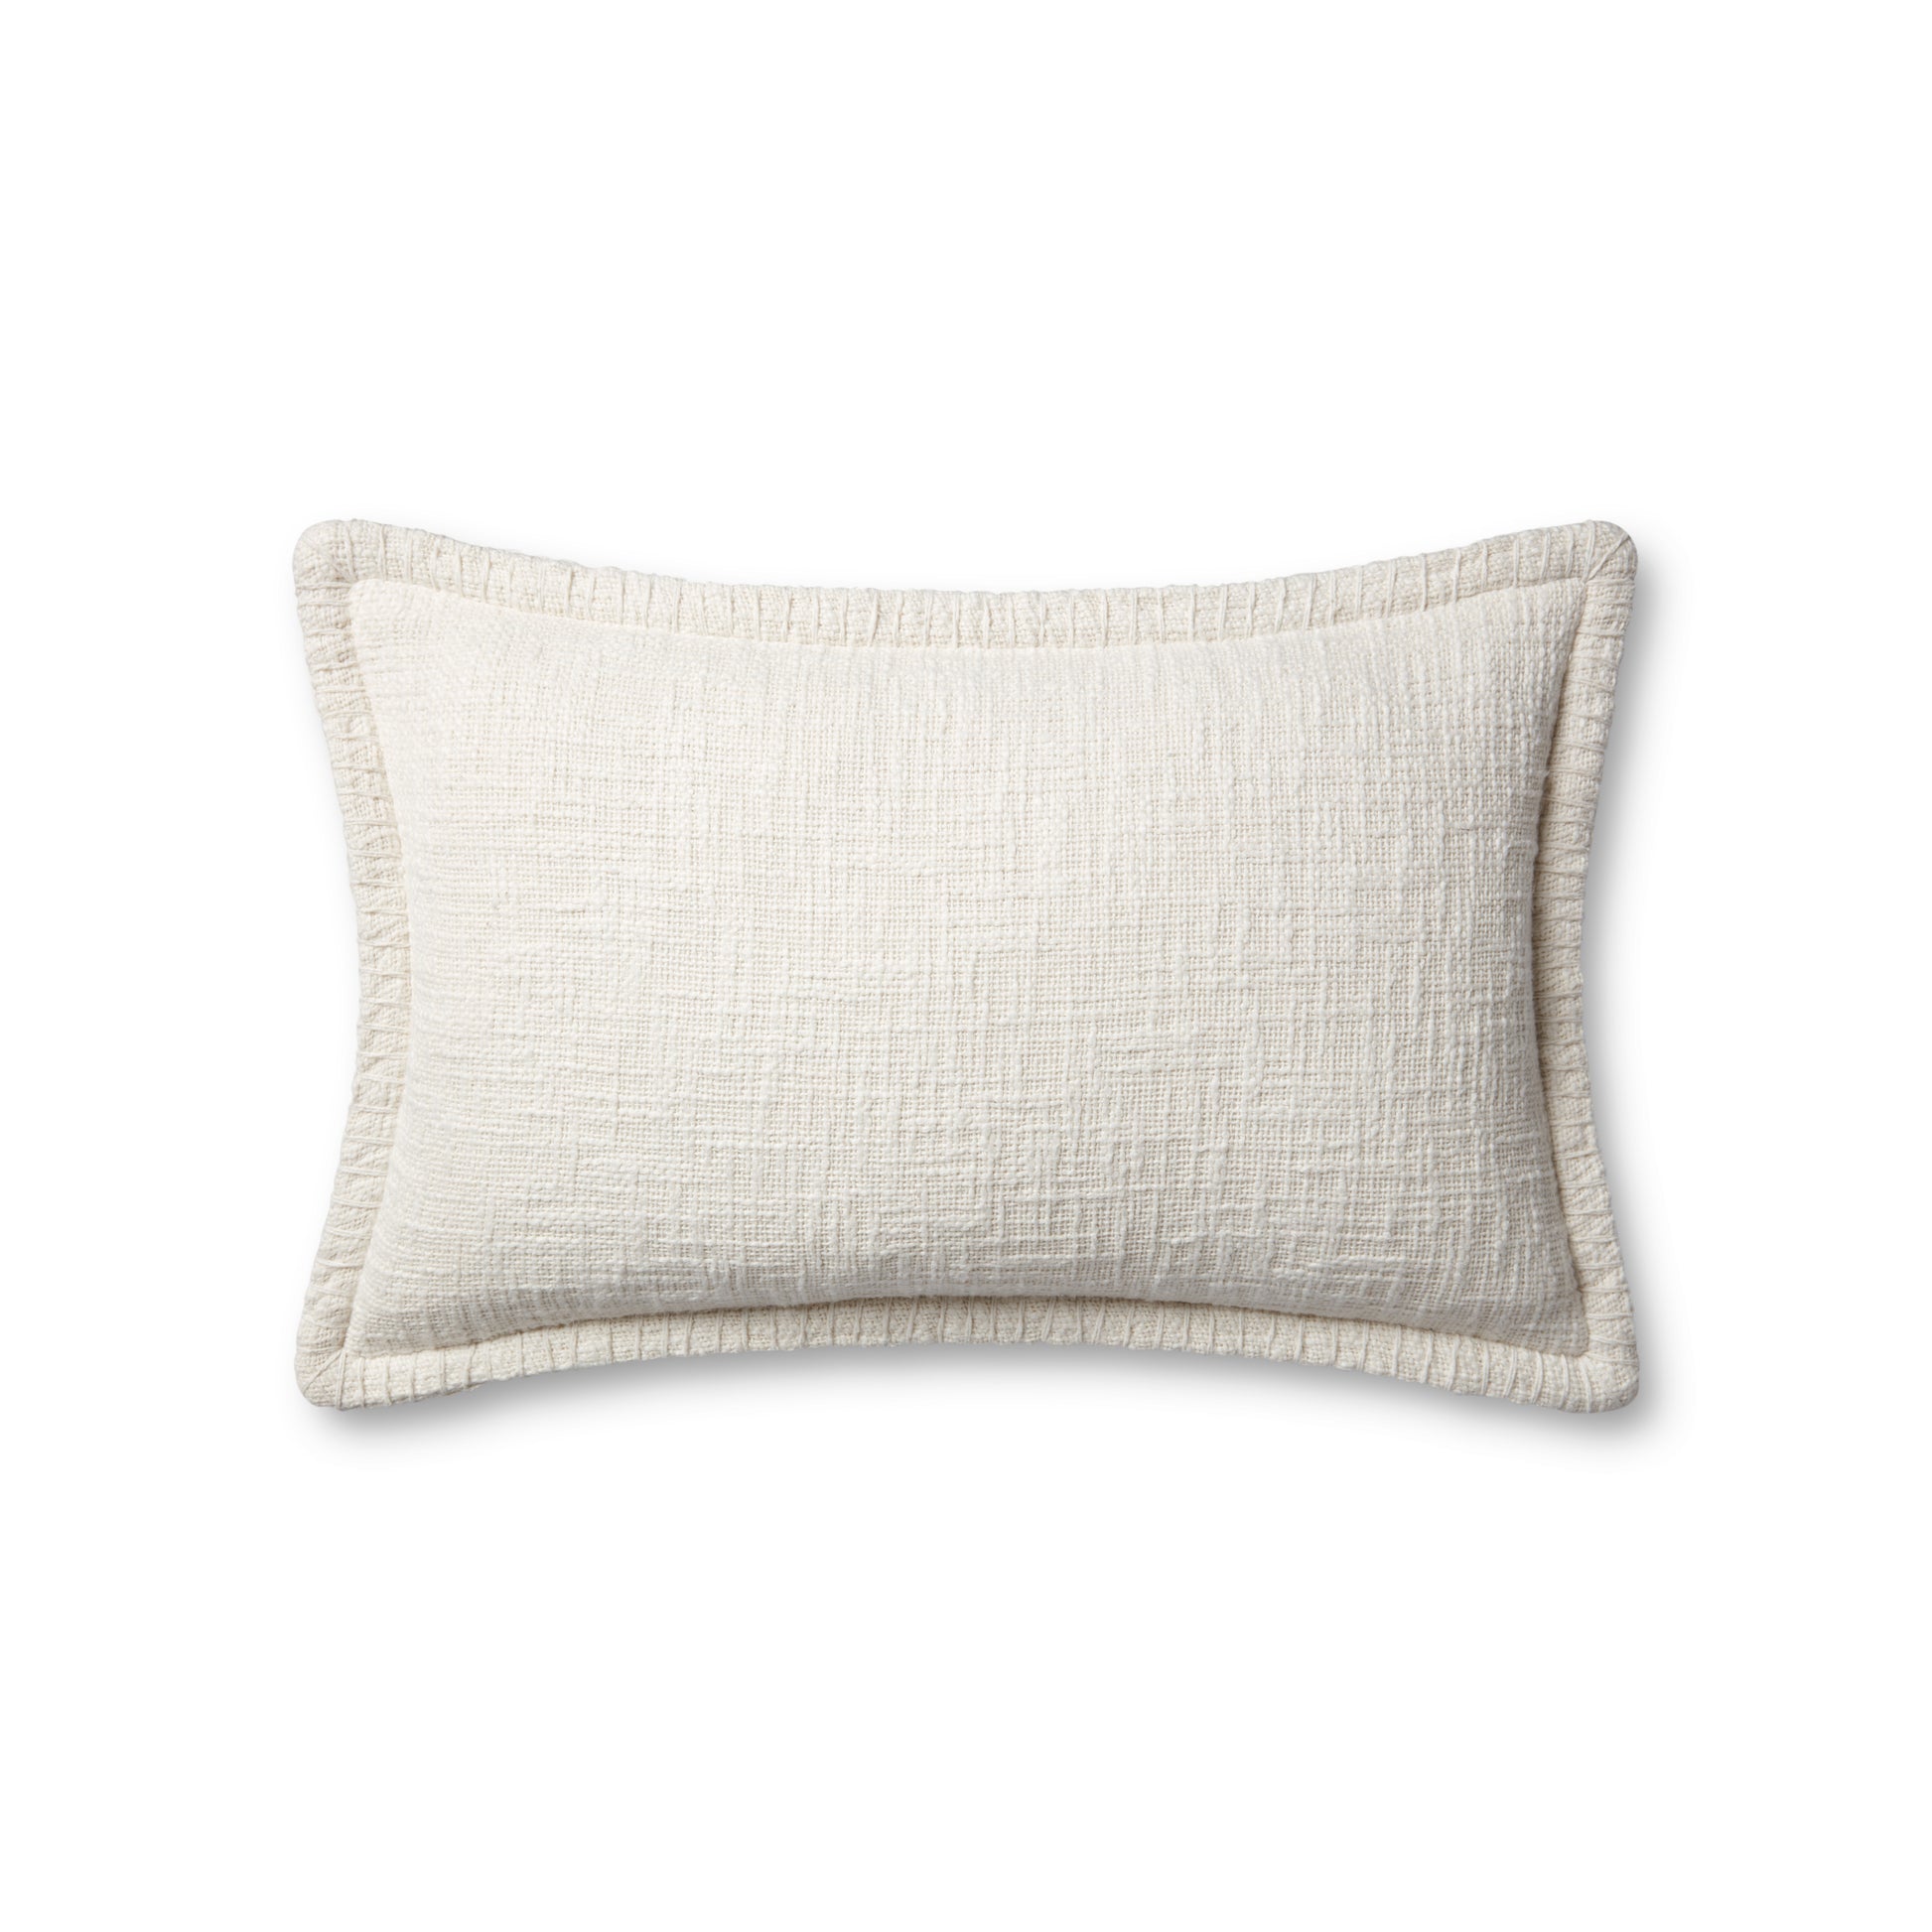 Photo of a pillow;  PLL0109 Ivory 13'' x 21'' Cover w/Poly Pillow